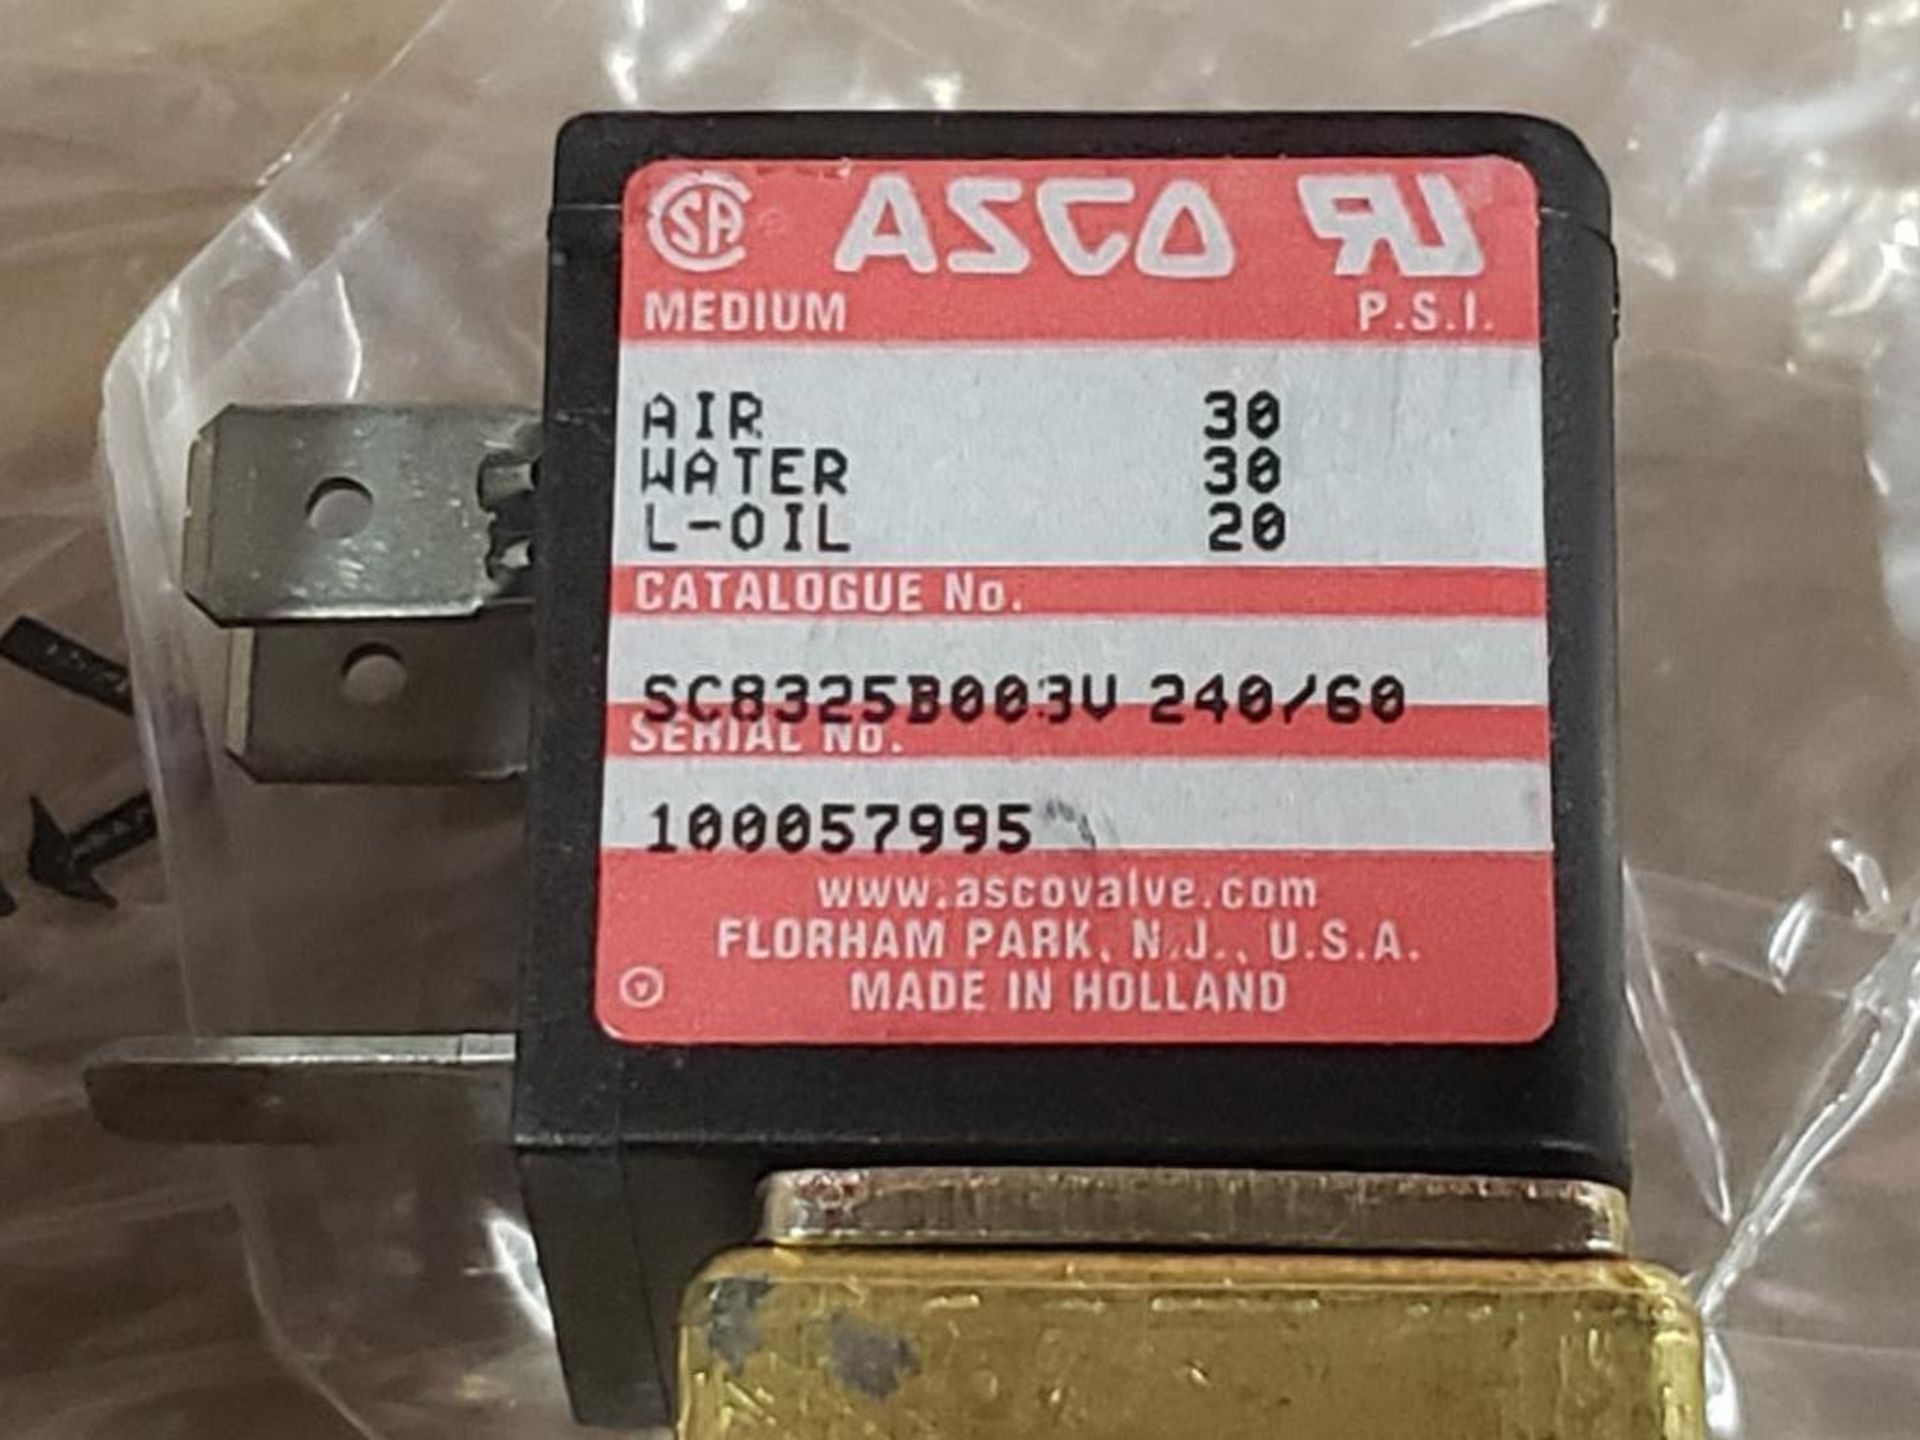 Qty 30 - ASCO SC8325B003V 240/60 solenoid valve. 30psi air/ 30psi water / 20 l-oil. New in package. - Image 3 of 3